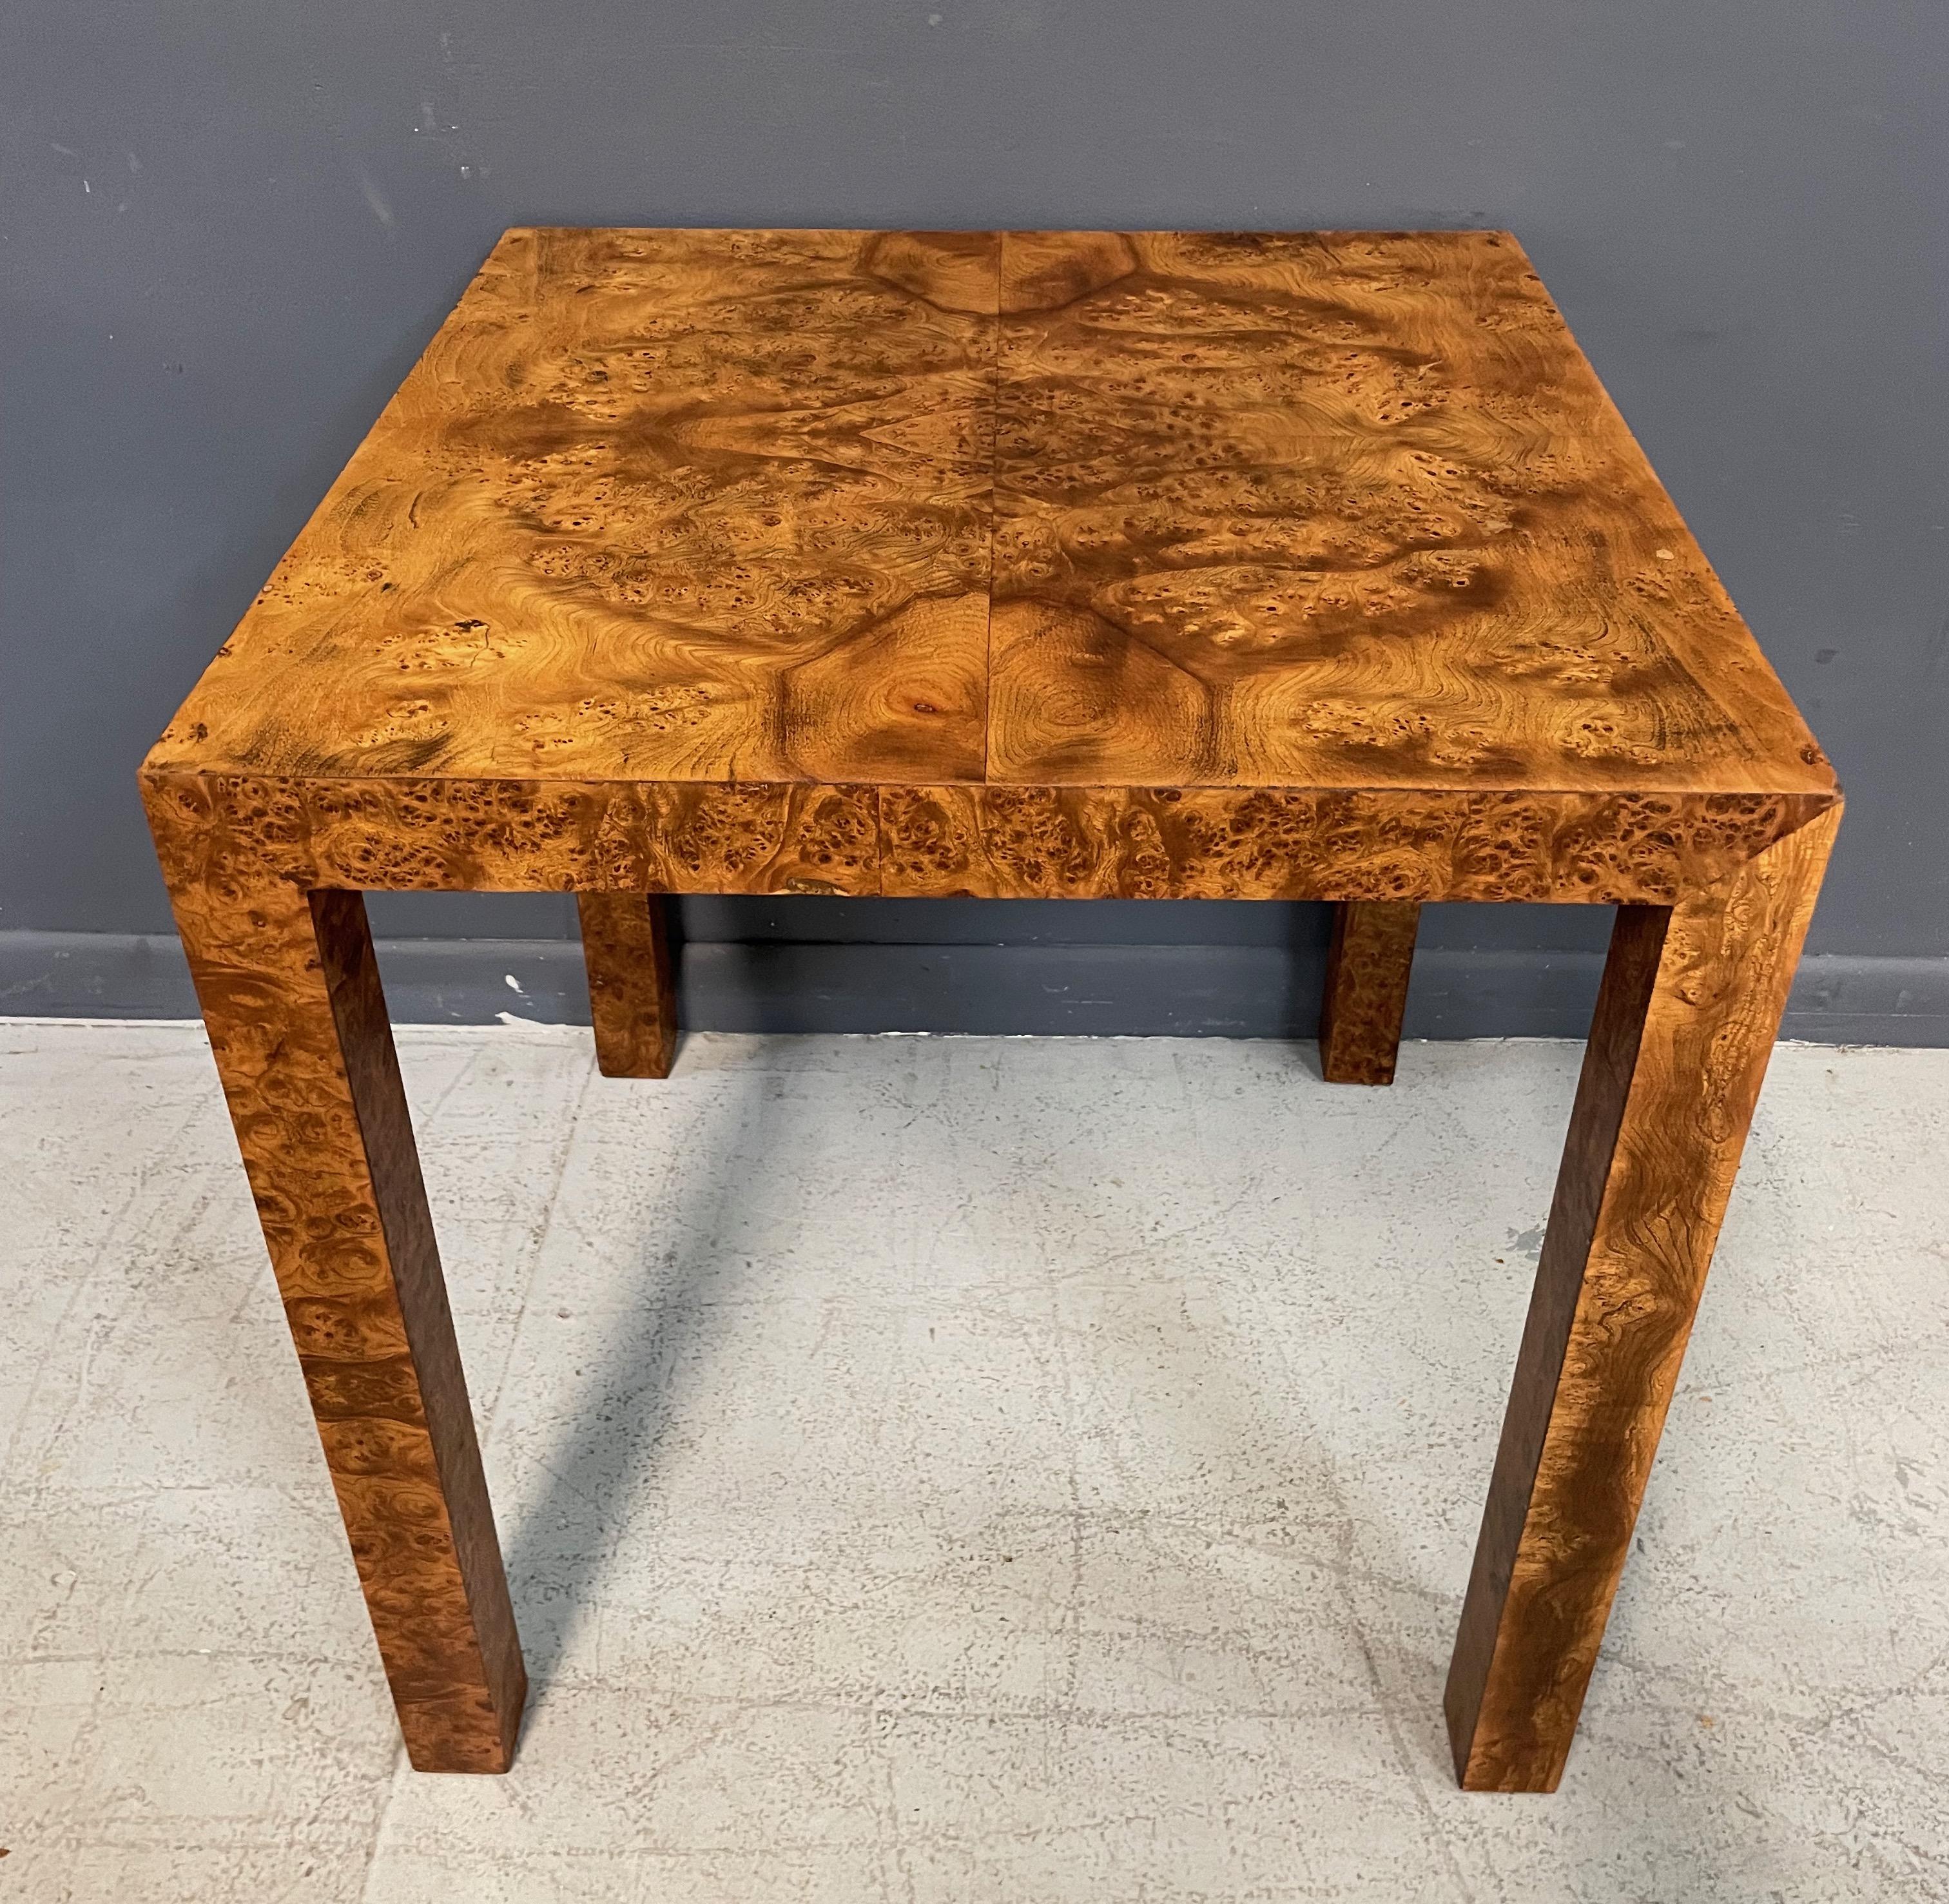 Beautiful burl olivewood parsons table that will grace many rooms and situations. Wonderfully figured burl covers this table and will make a handsome addition to any project.